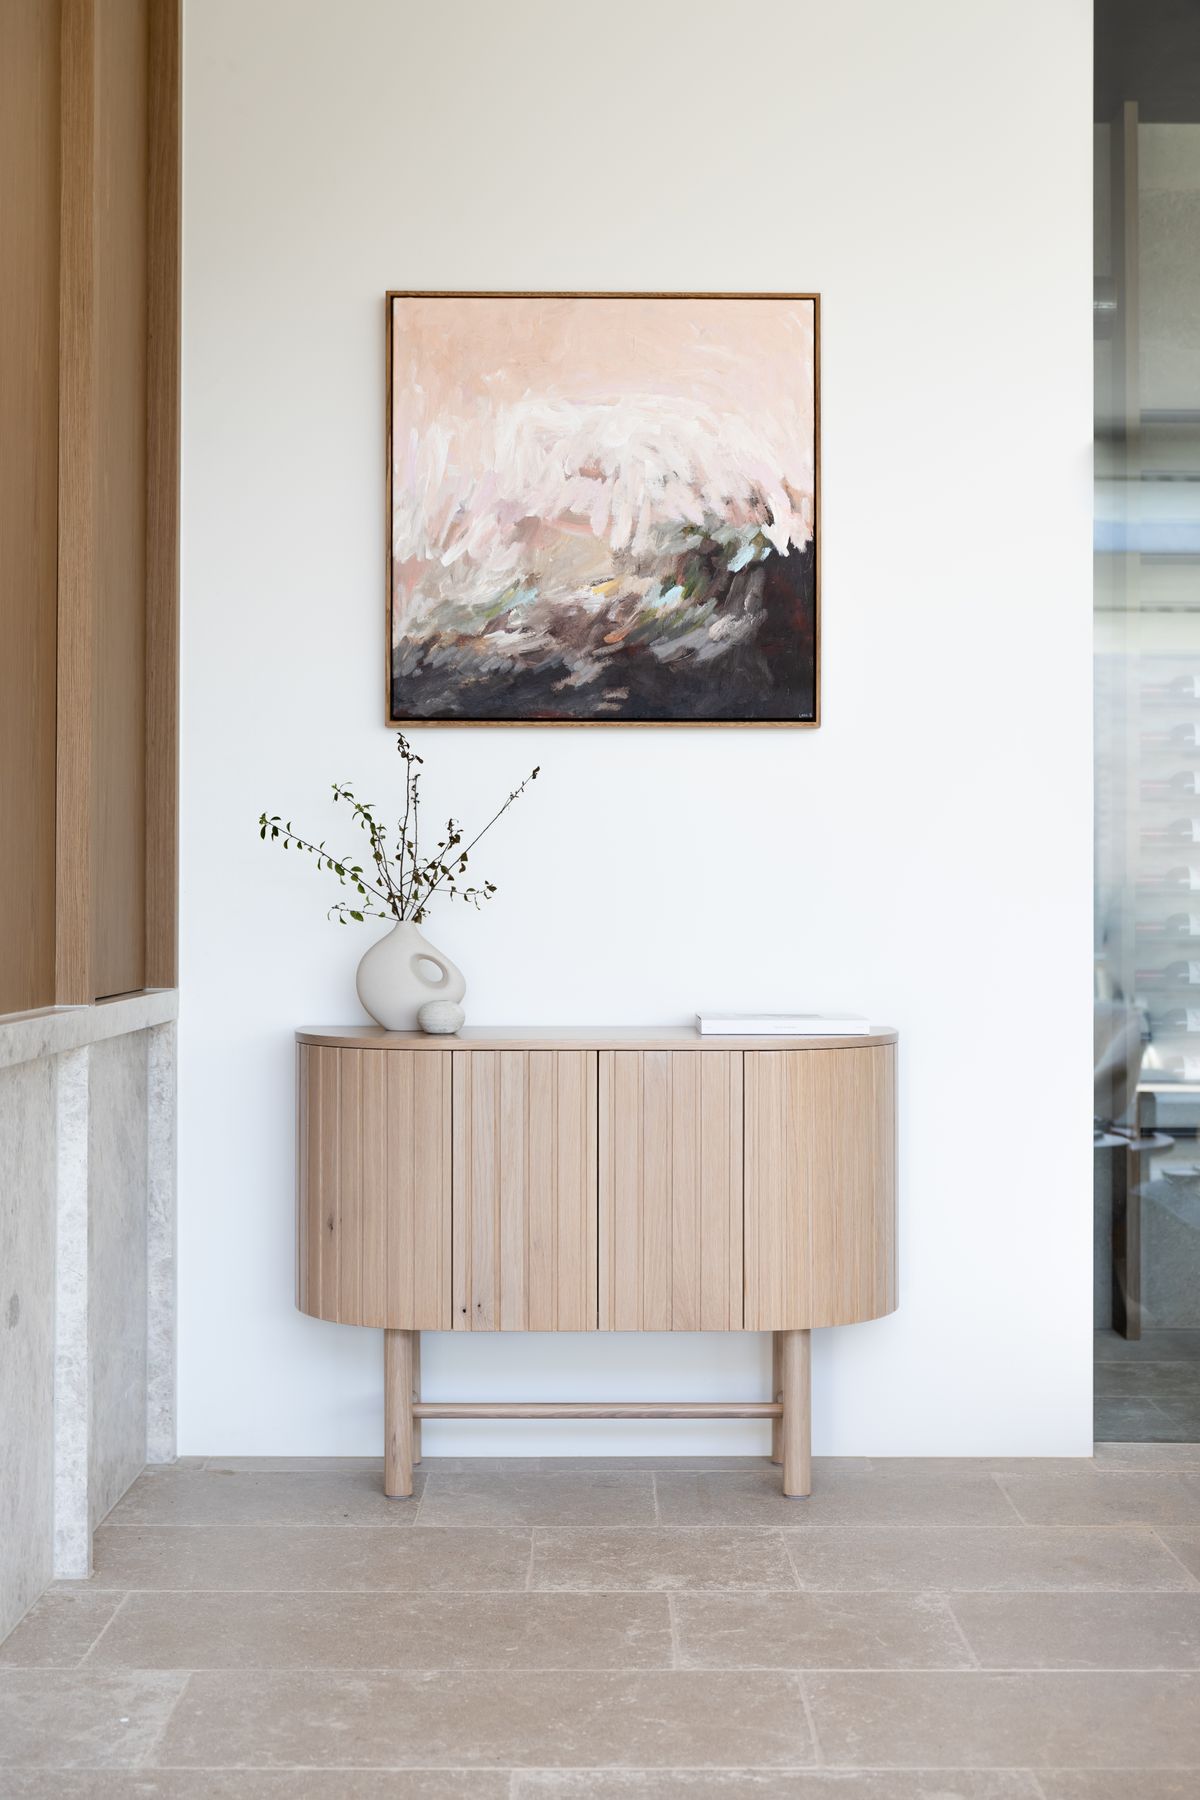 wooden sideboard against a wall. Above the sideboard hangs a framed abstract painting with hues of pink, white, and gray.